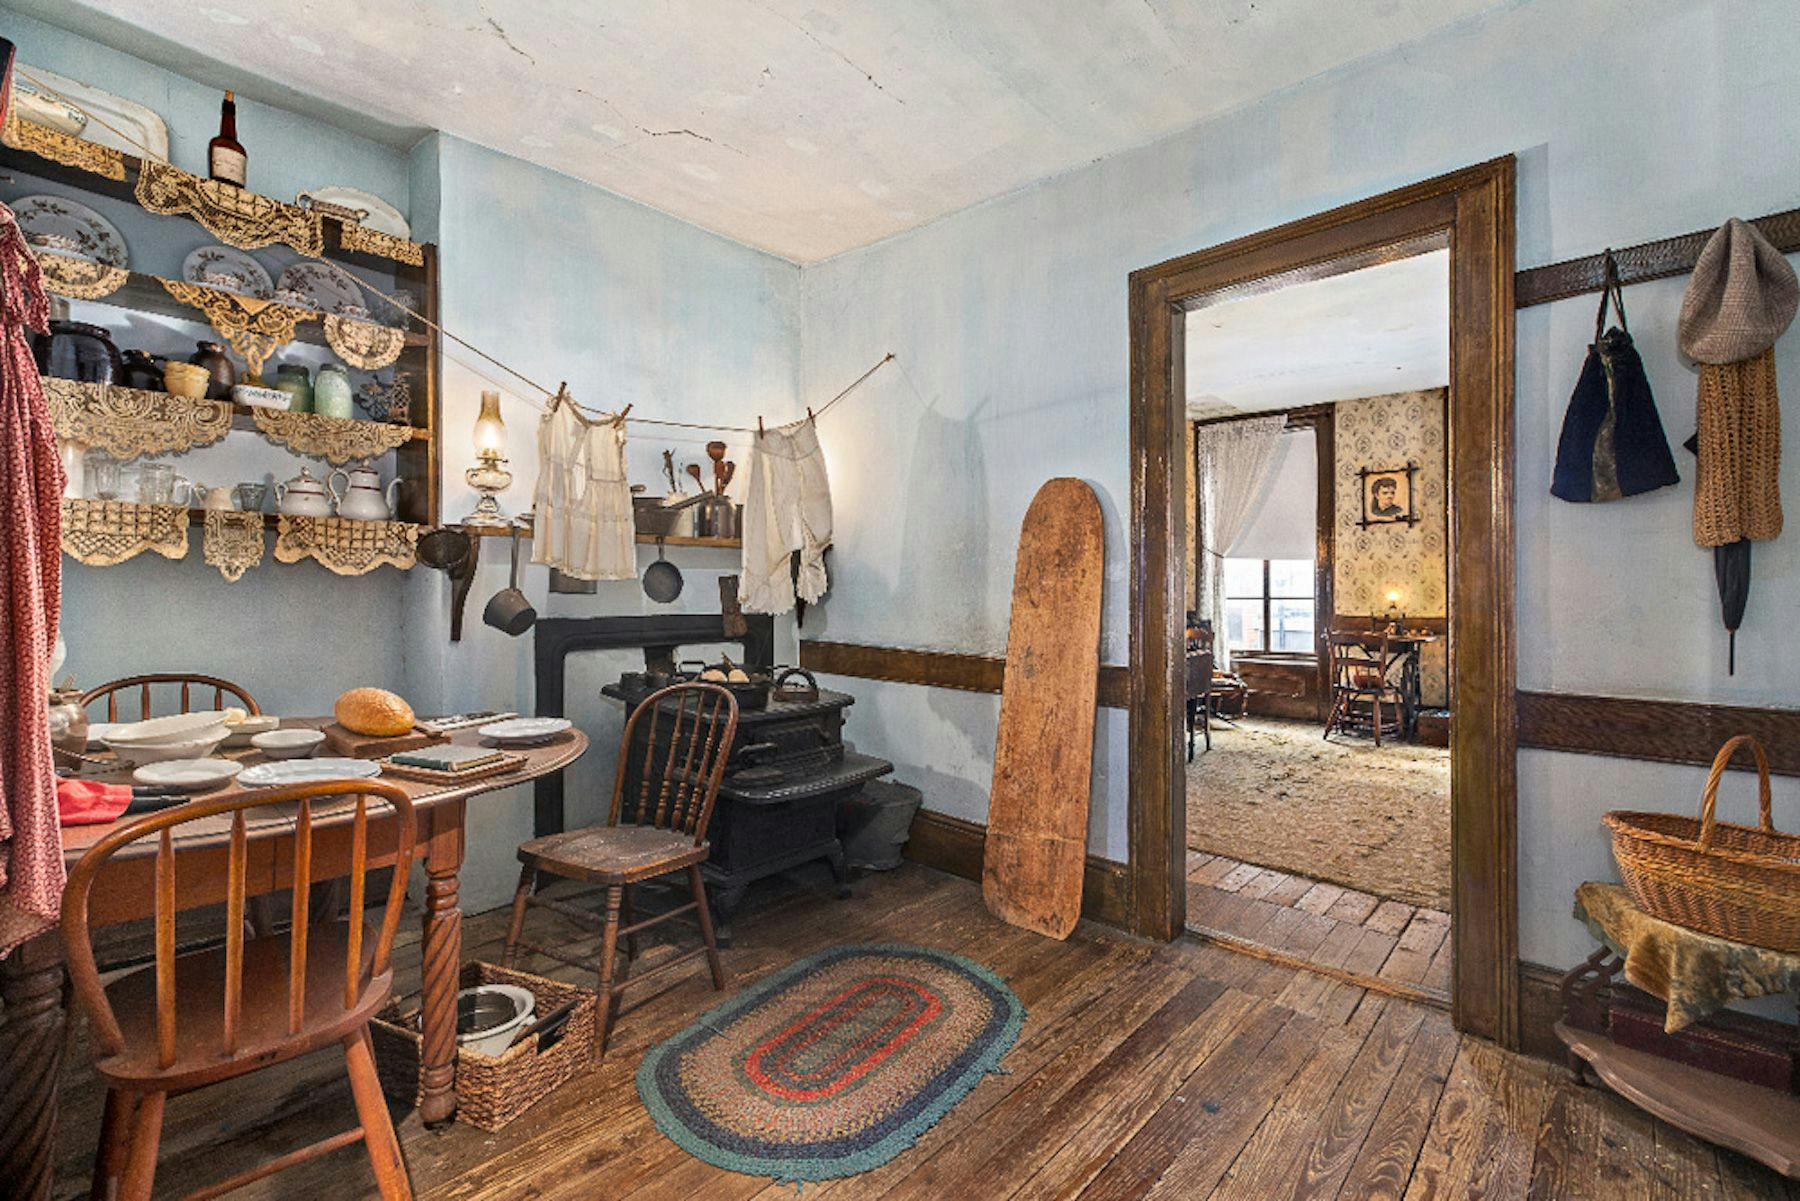 The Tenement Museum in Lower East Side, Manhattan